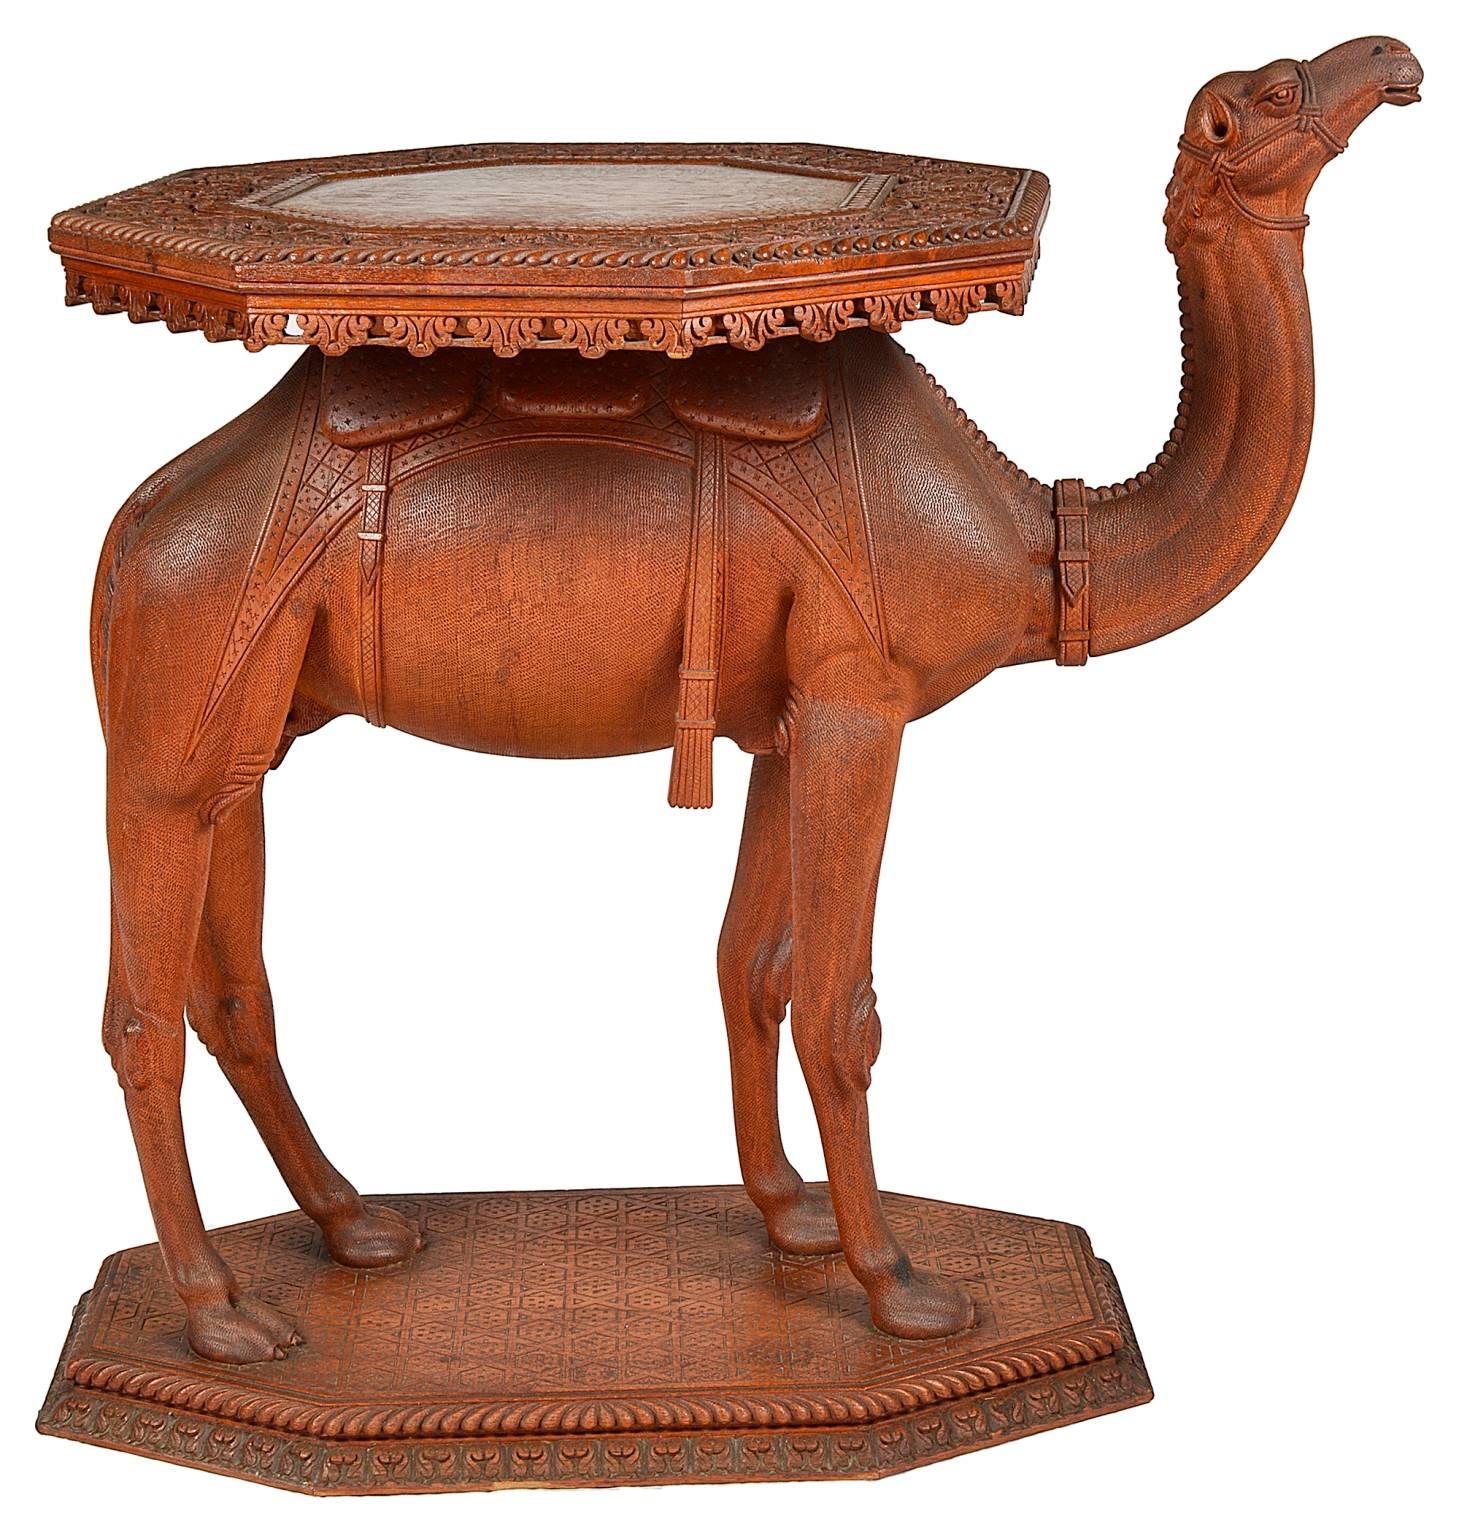 A beautifully carved 19th century Anglo-Indian carved camel table, circa 1890.